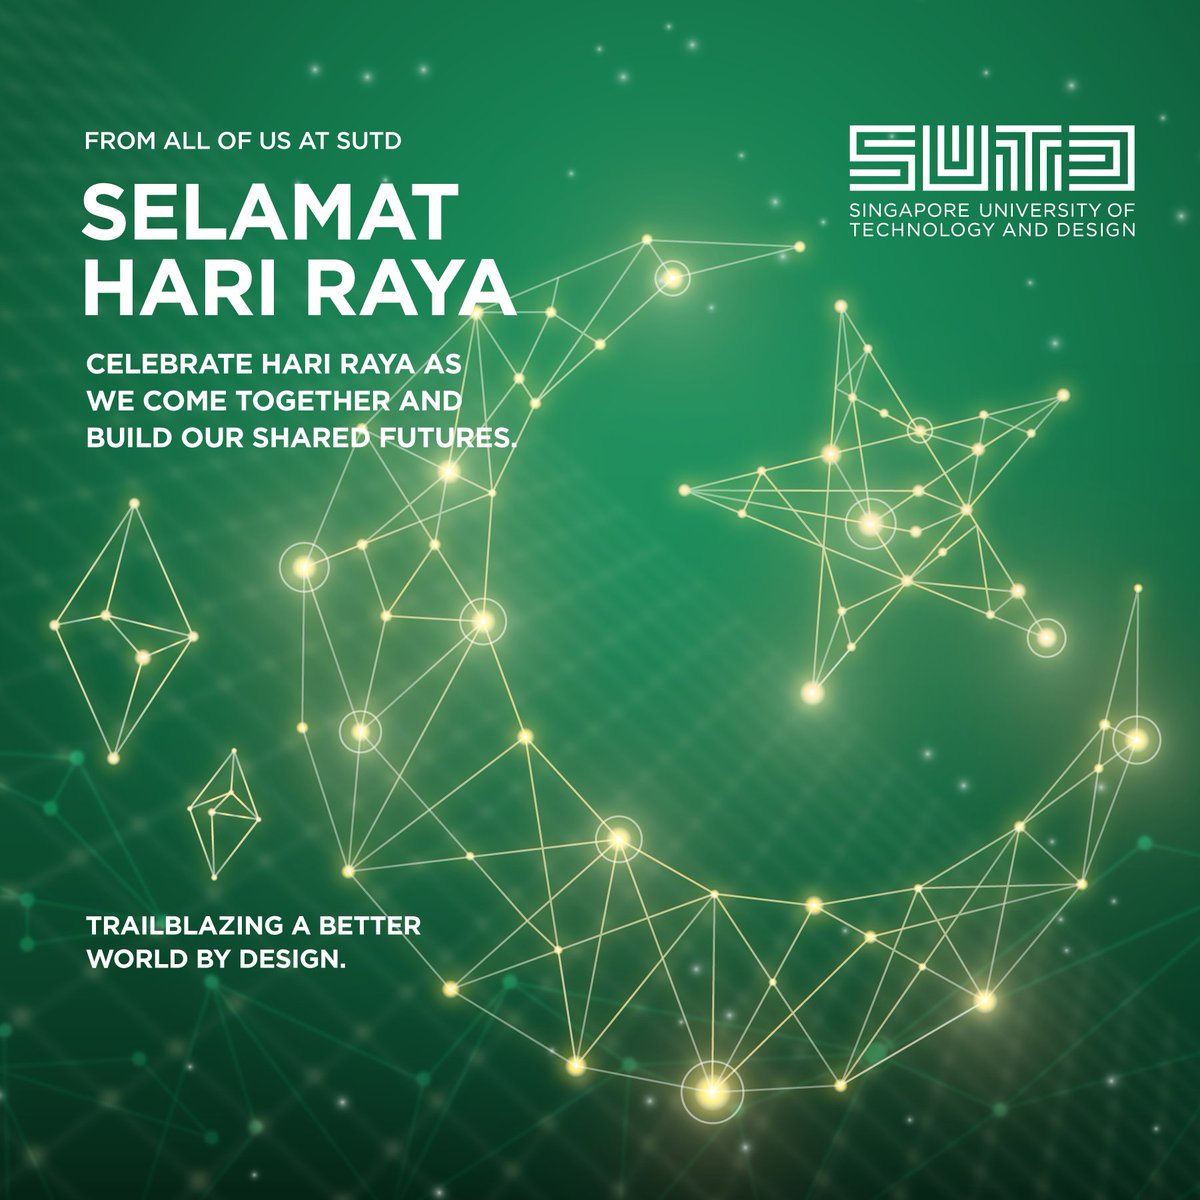 Selamat Hari Raya to all our Muslim friends and may you spend meaningful moments with your family, friends and loved ones.